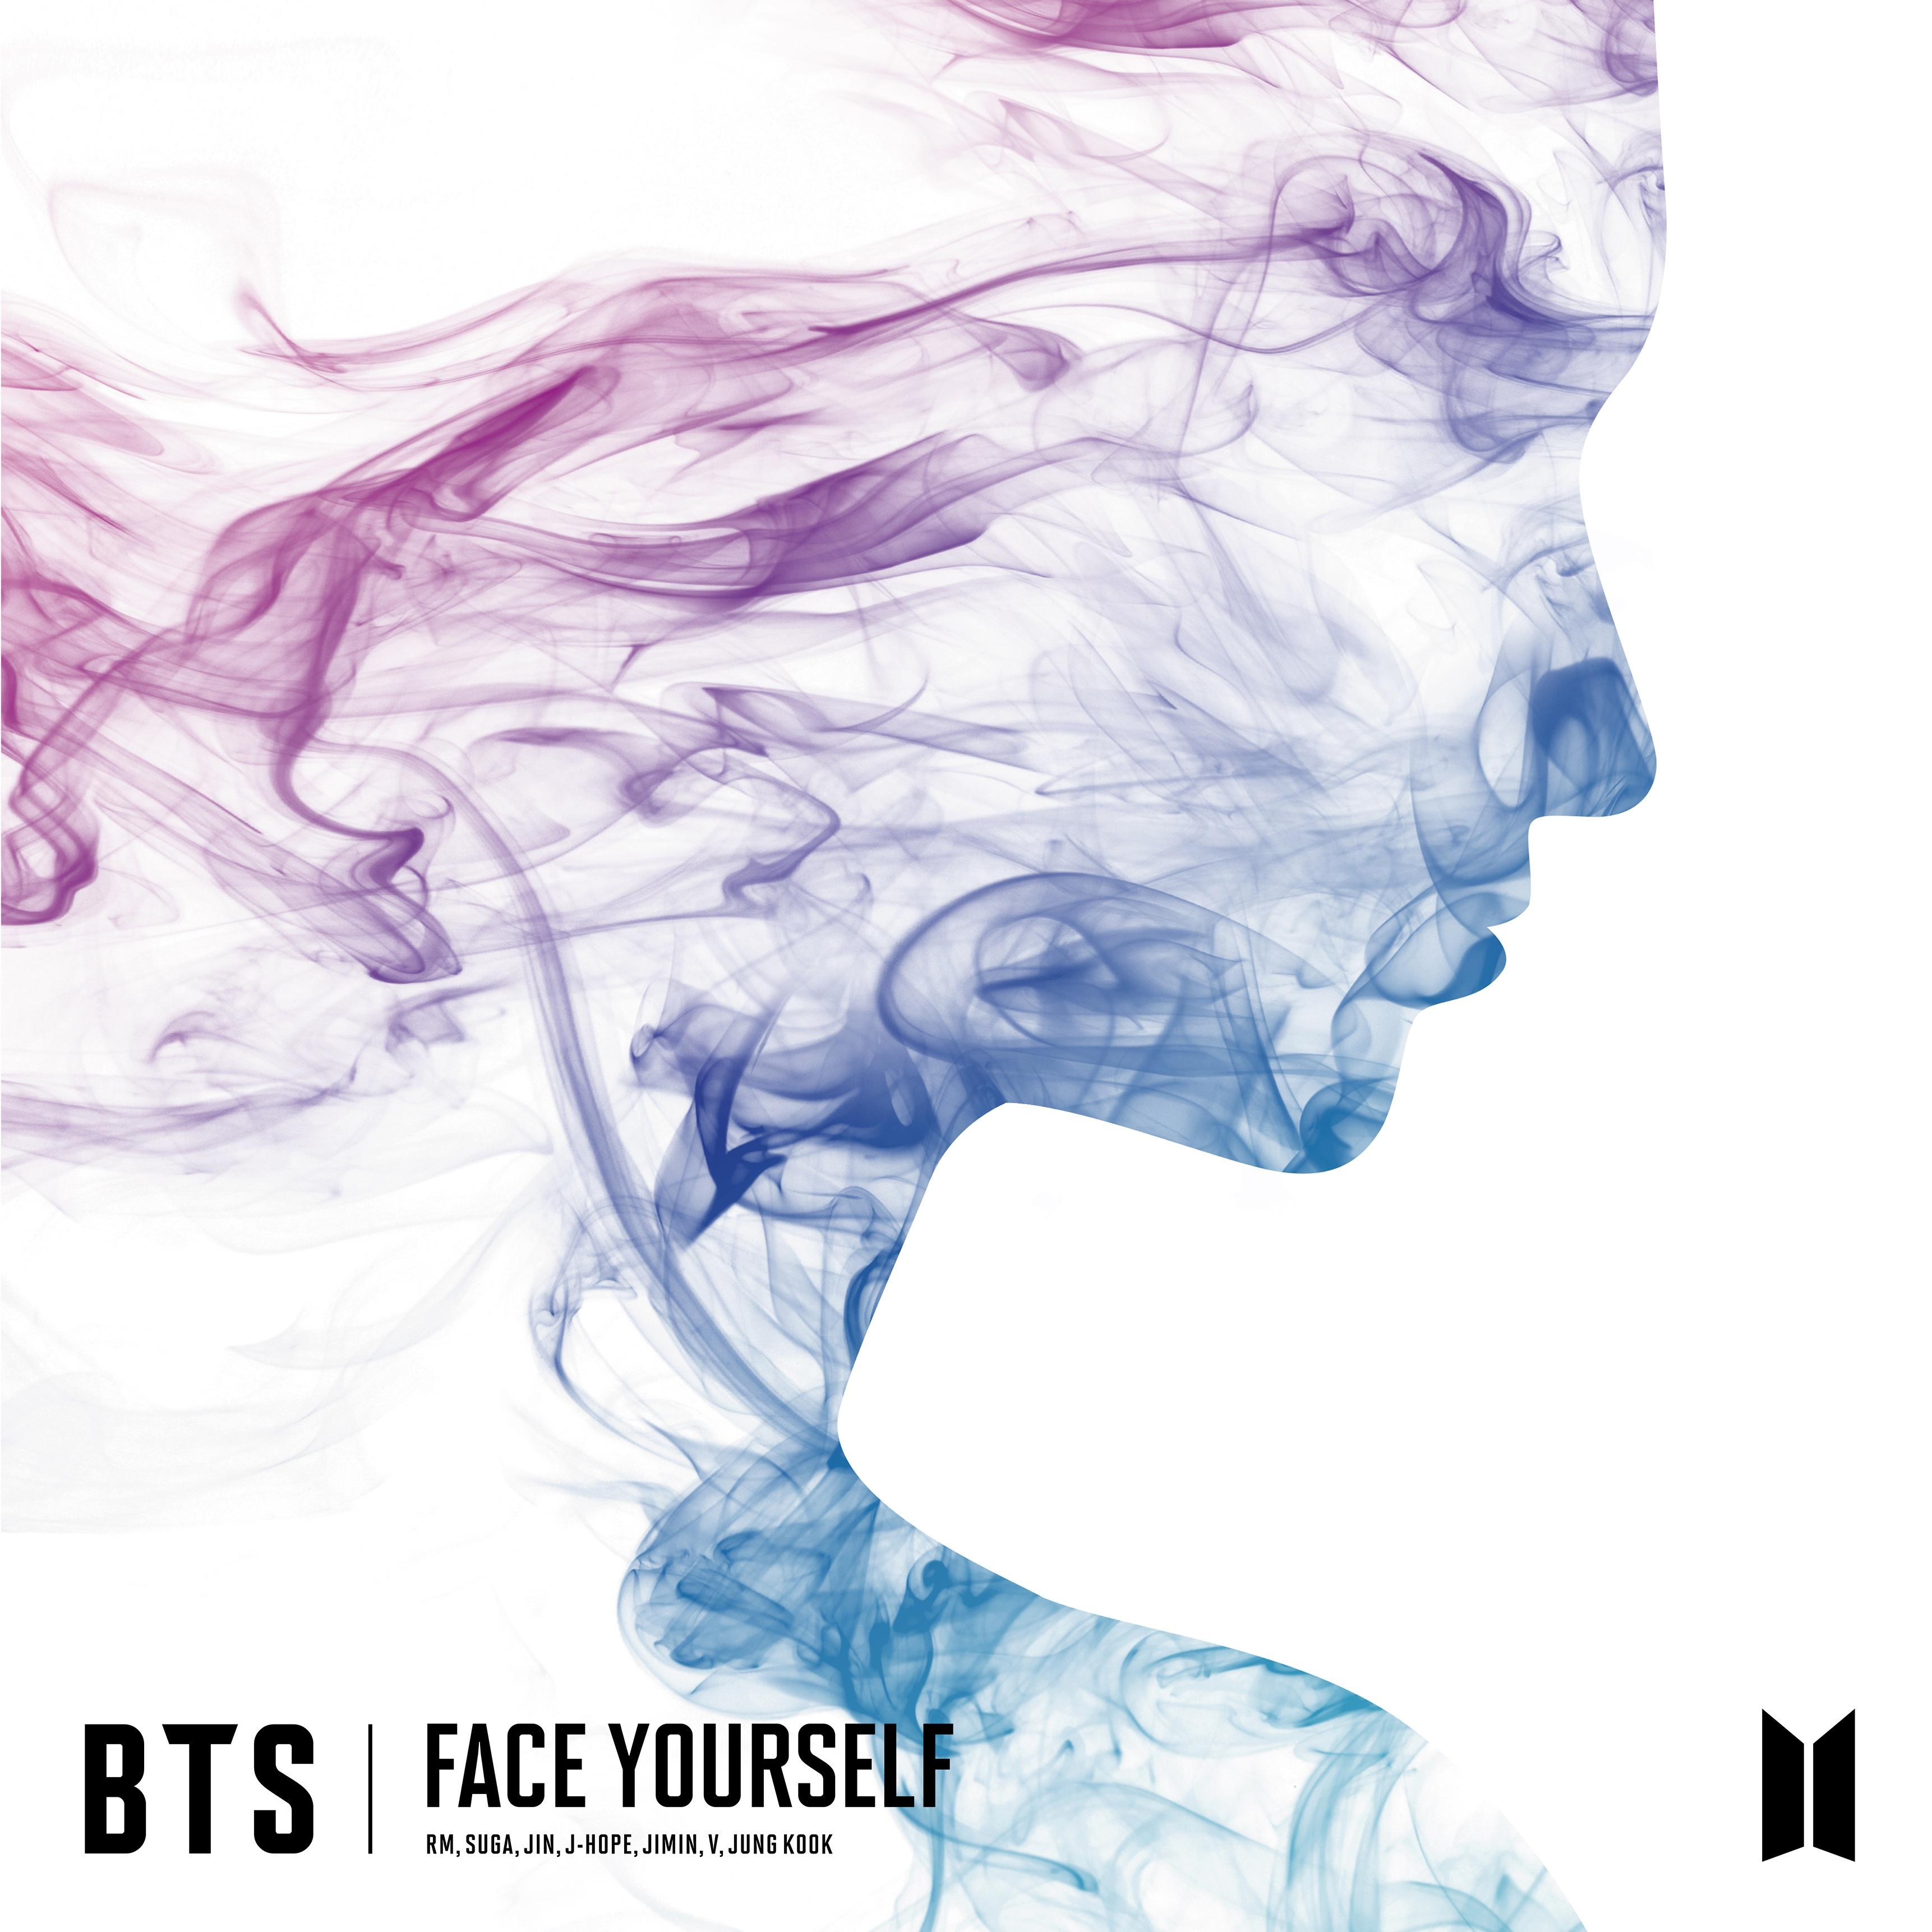 Bts don t leave. BTS face yourself альбом обложка. Face yourself BTS обложка. BTS album face yourself. BTS don't leave me альбом.